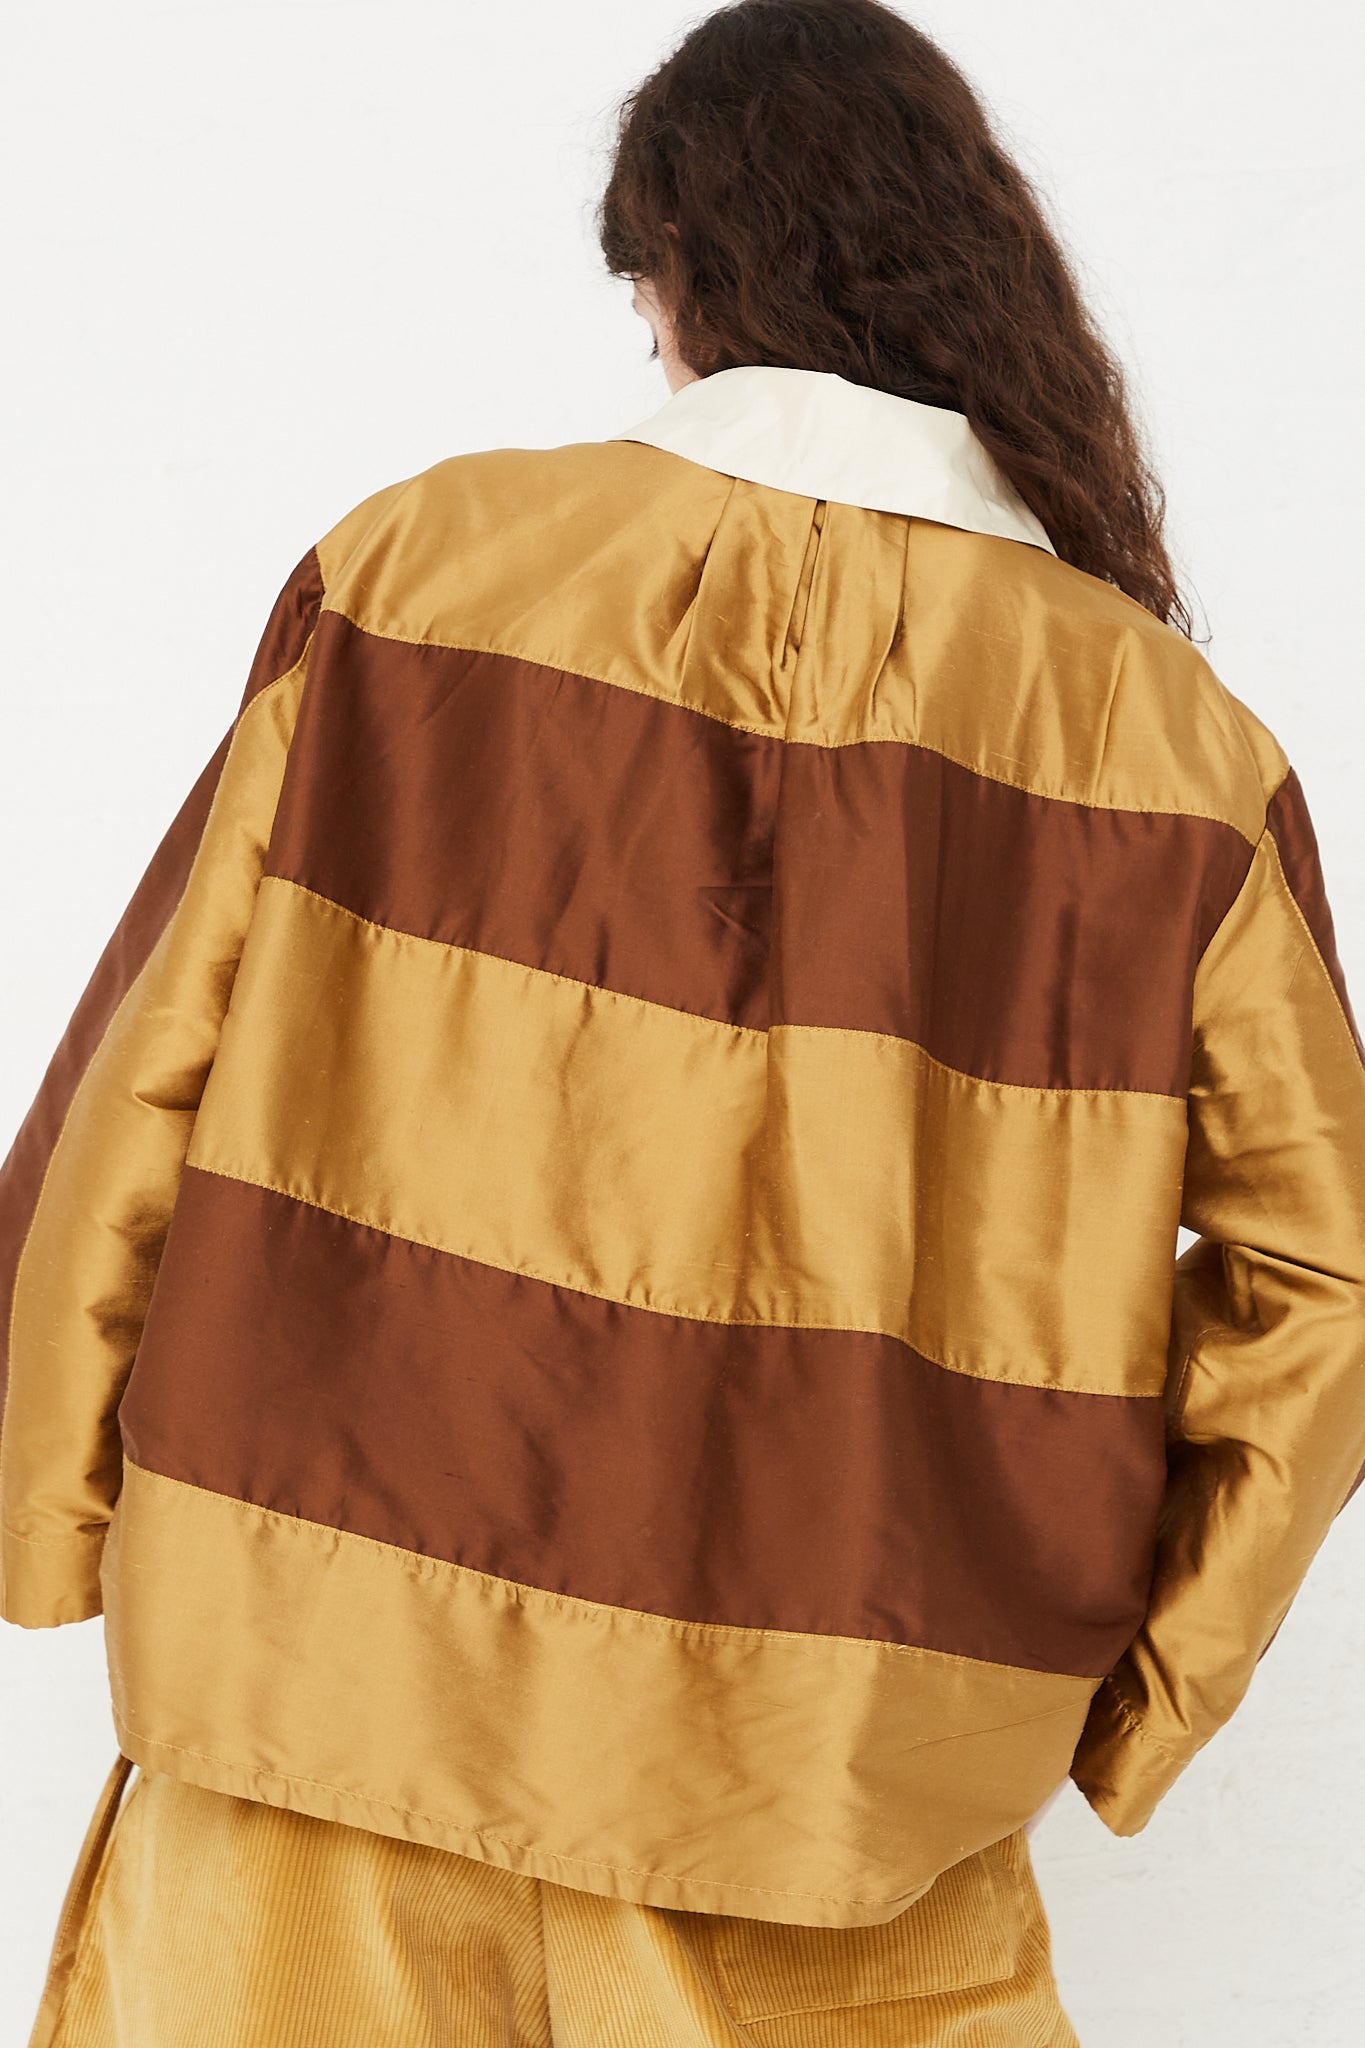 A model wearing a striped rugby shirt in a shiny silk doupion. Features a contrast fold-over collar and button placket, with an adjustable drawstring at hem. Back view and up close. Designed by Cawley - Oroboro Store 